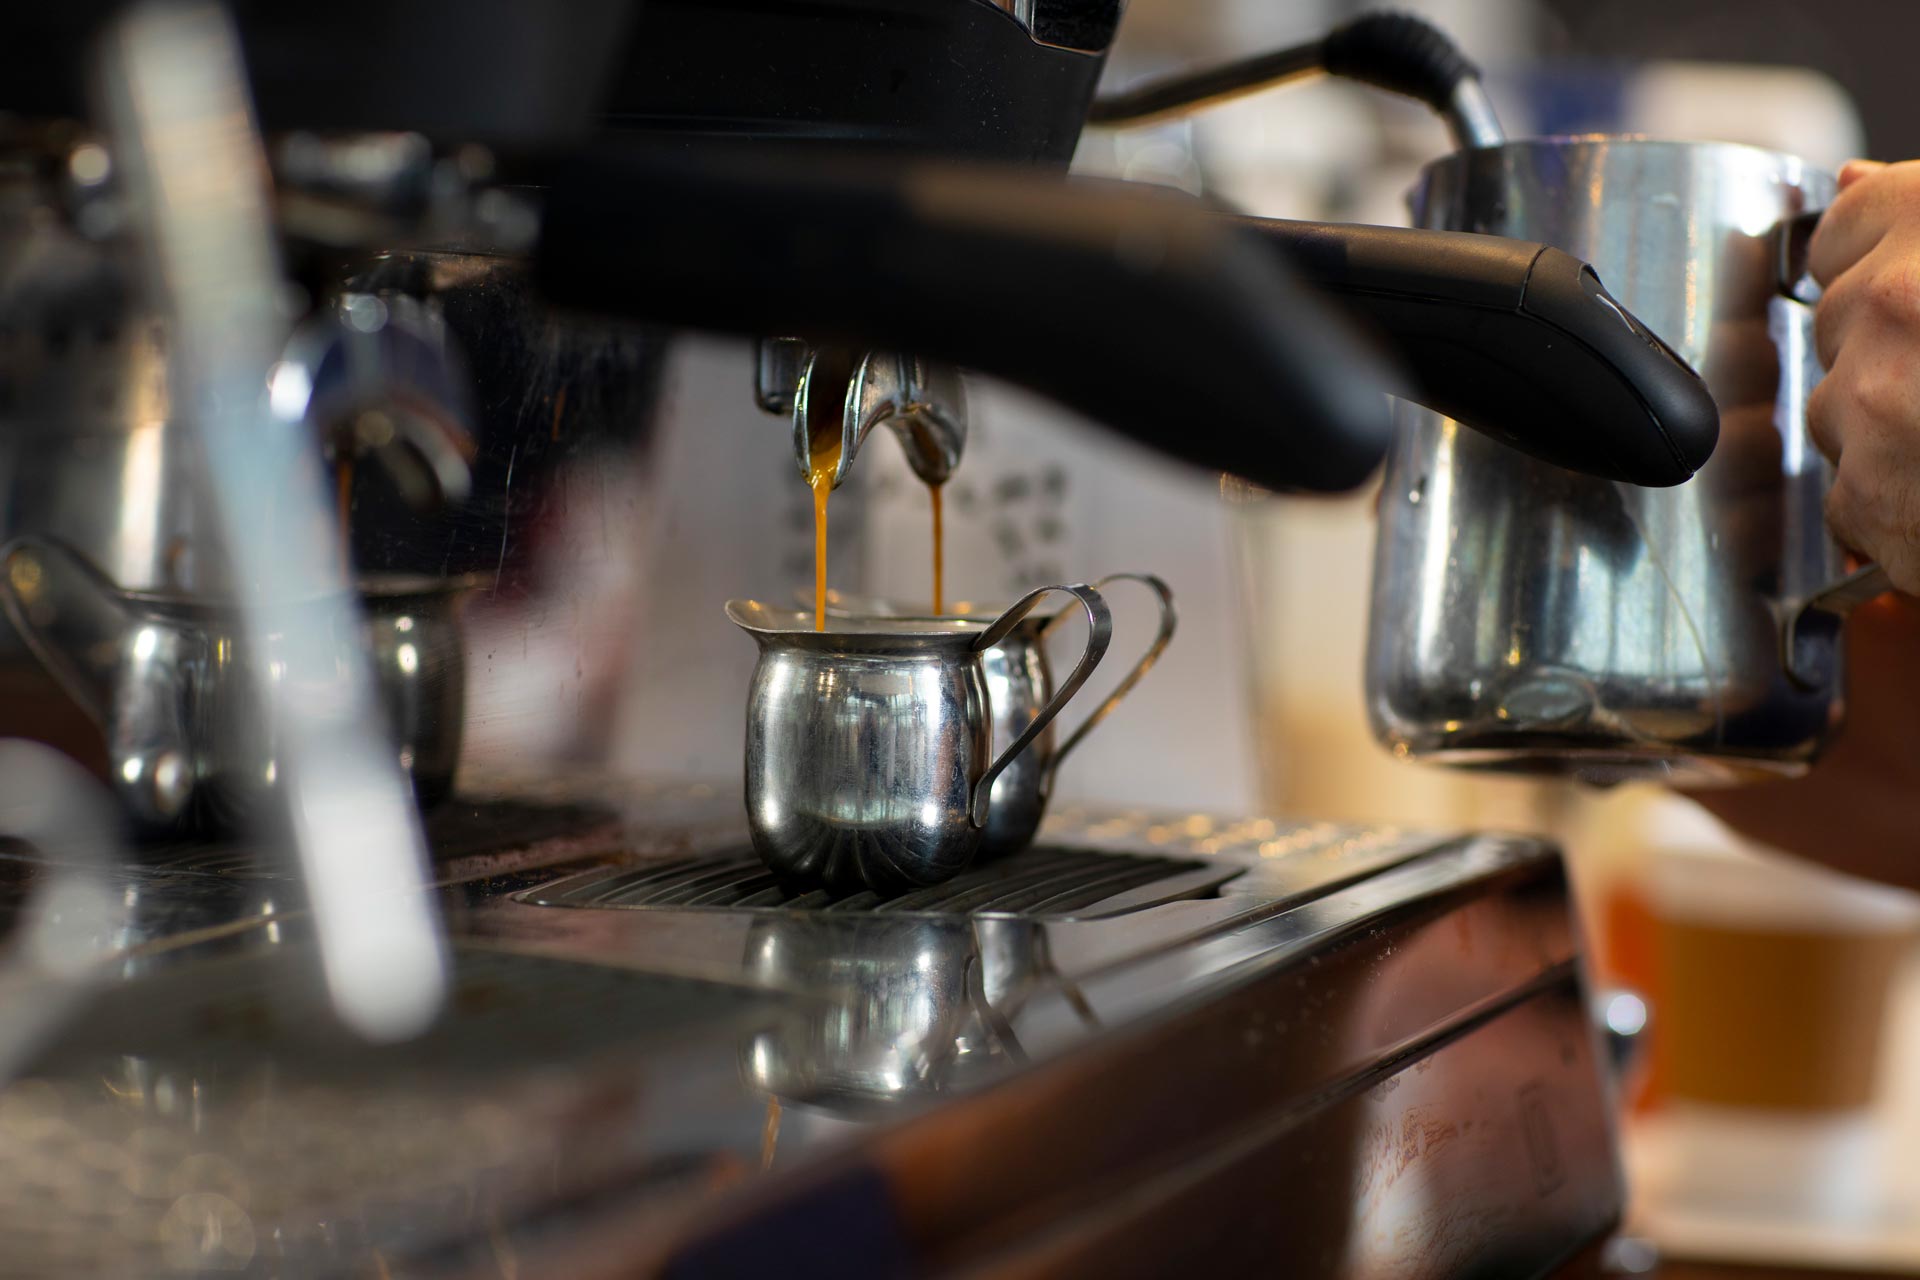 Photograph of an espresso being made at Austin Java